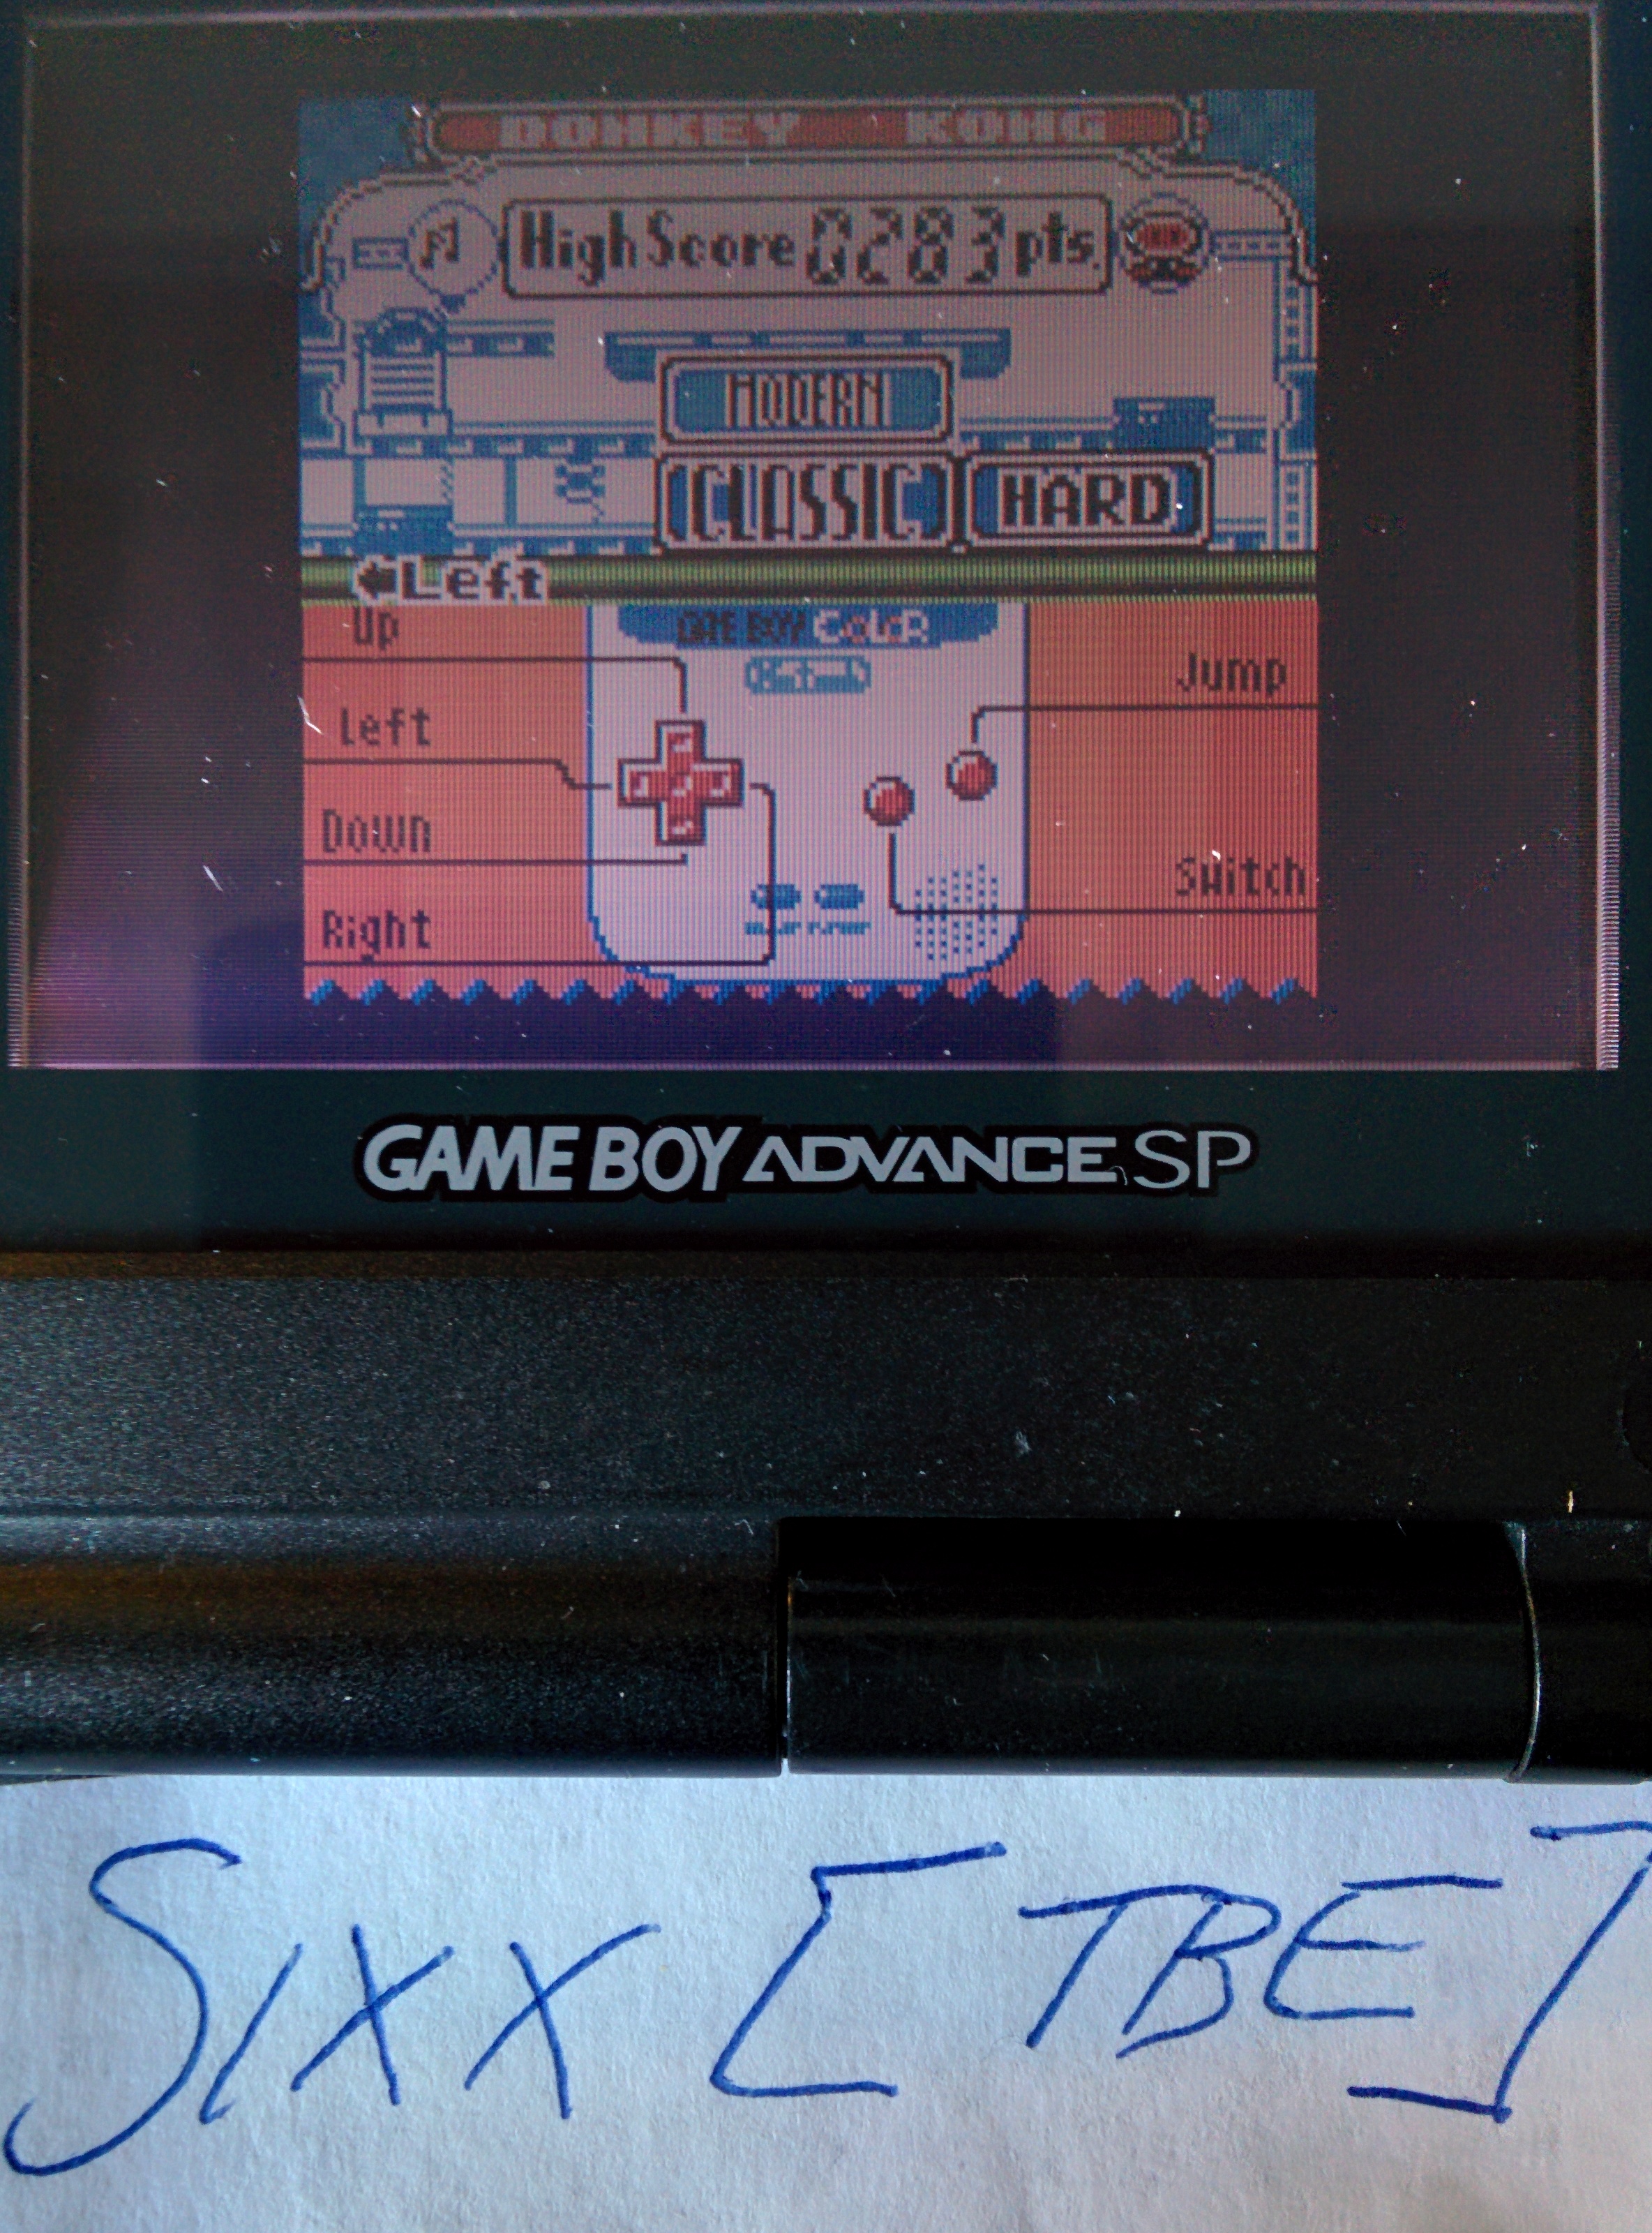 Sixx: Game & Watch Gallery 2: Donkey Kong: Classic: Hard (Game Boy Color) 283 points on 2014-08-23 01:40:55